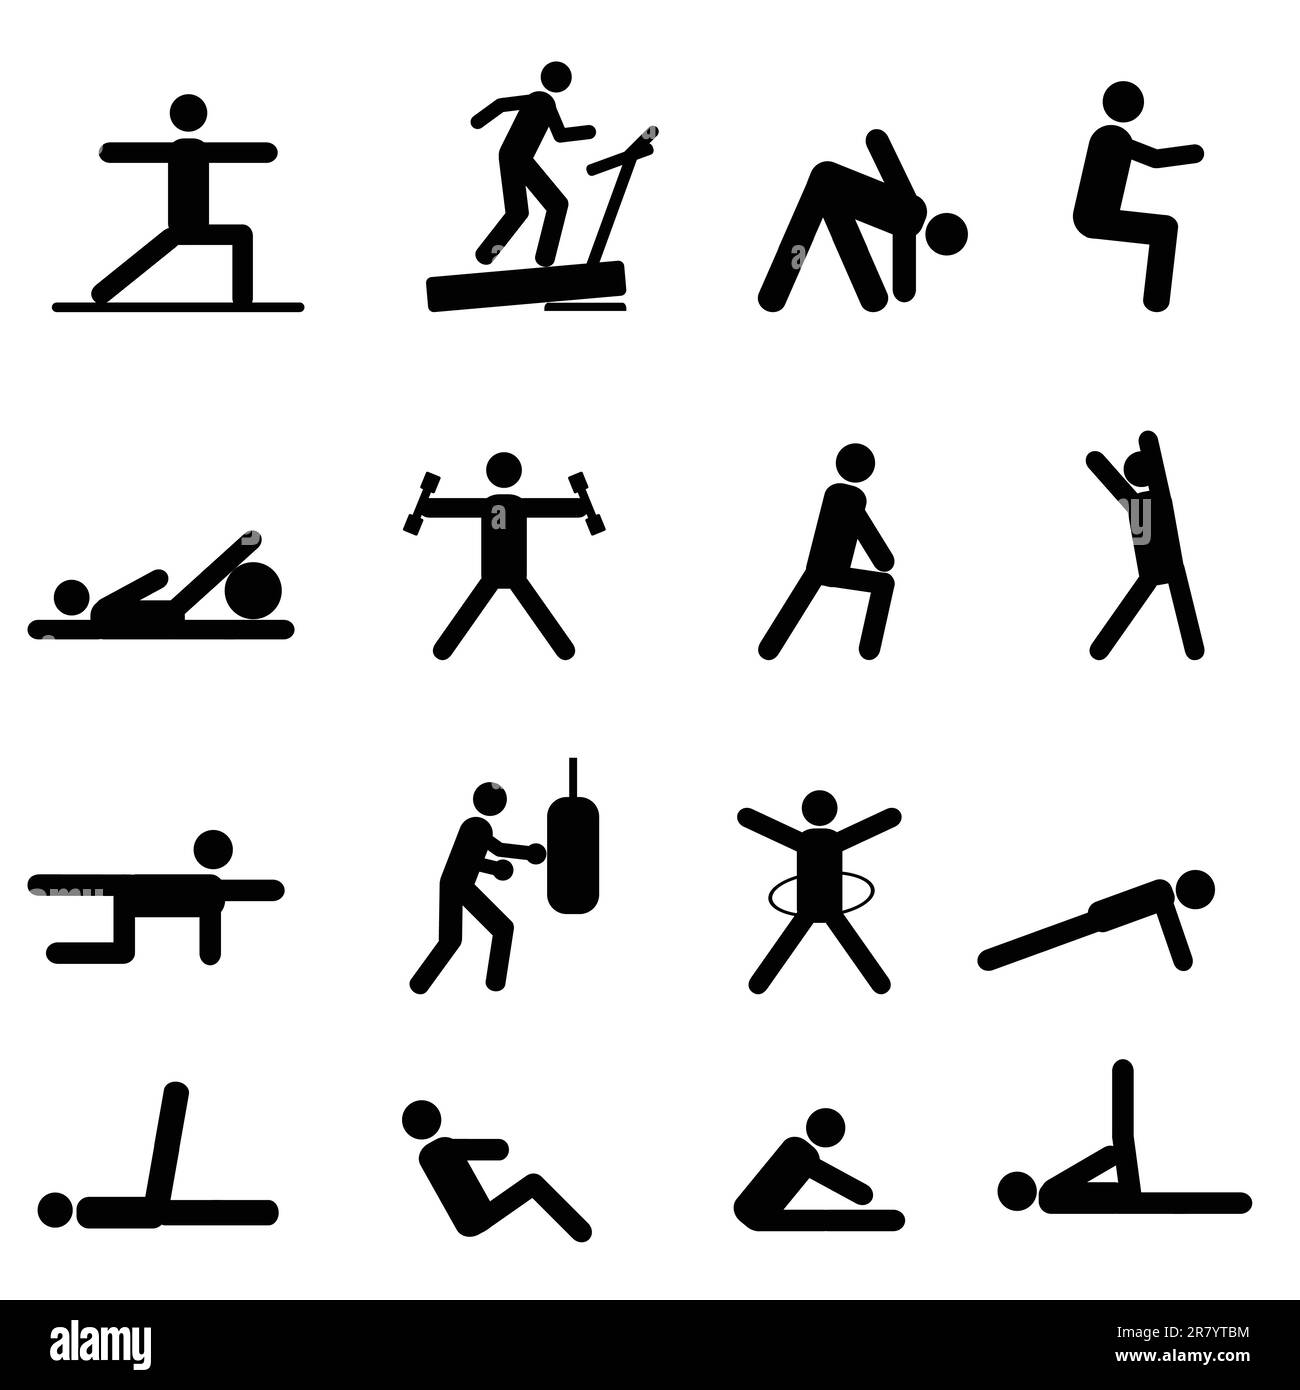 https://c8.alamy.com/comp/2R7YTBM/fitness-and-exercise-icon-set-in-black-2R7YTBM.jpg